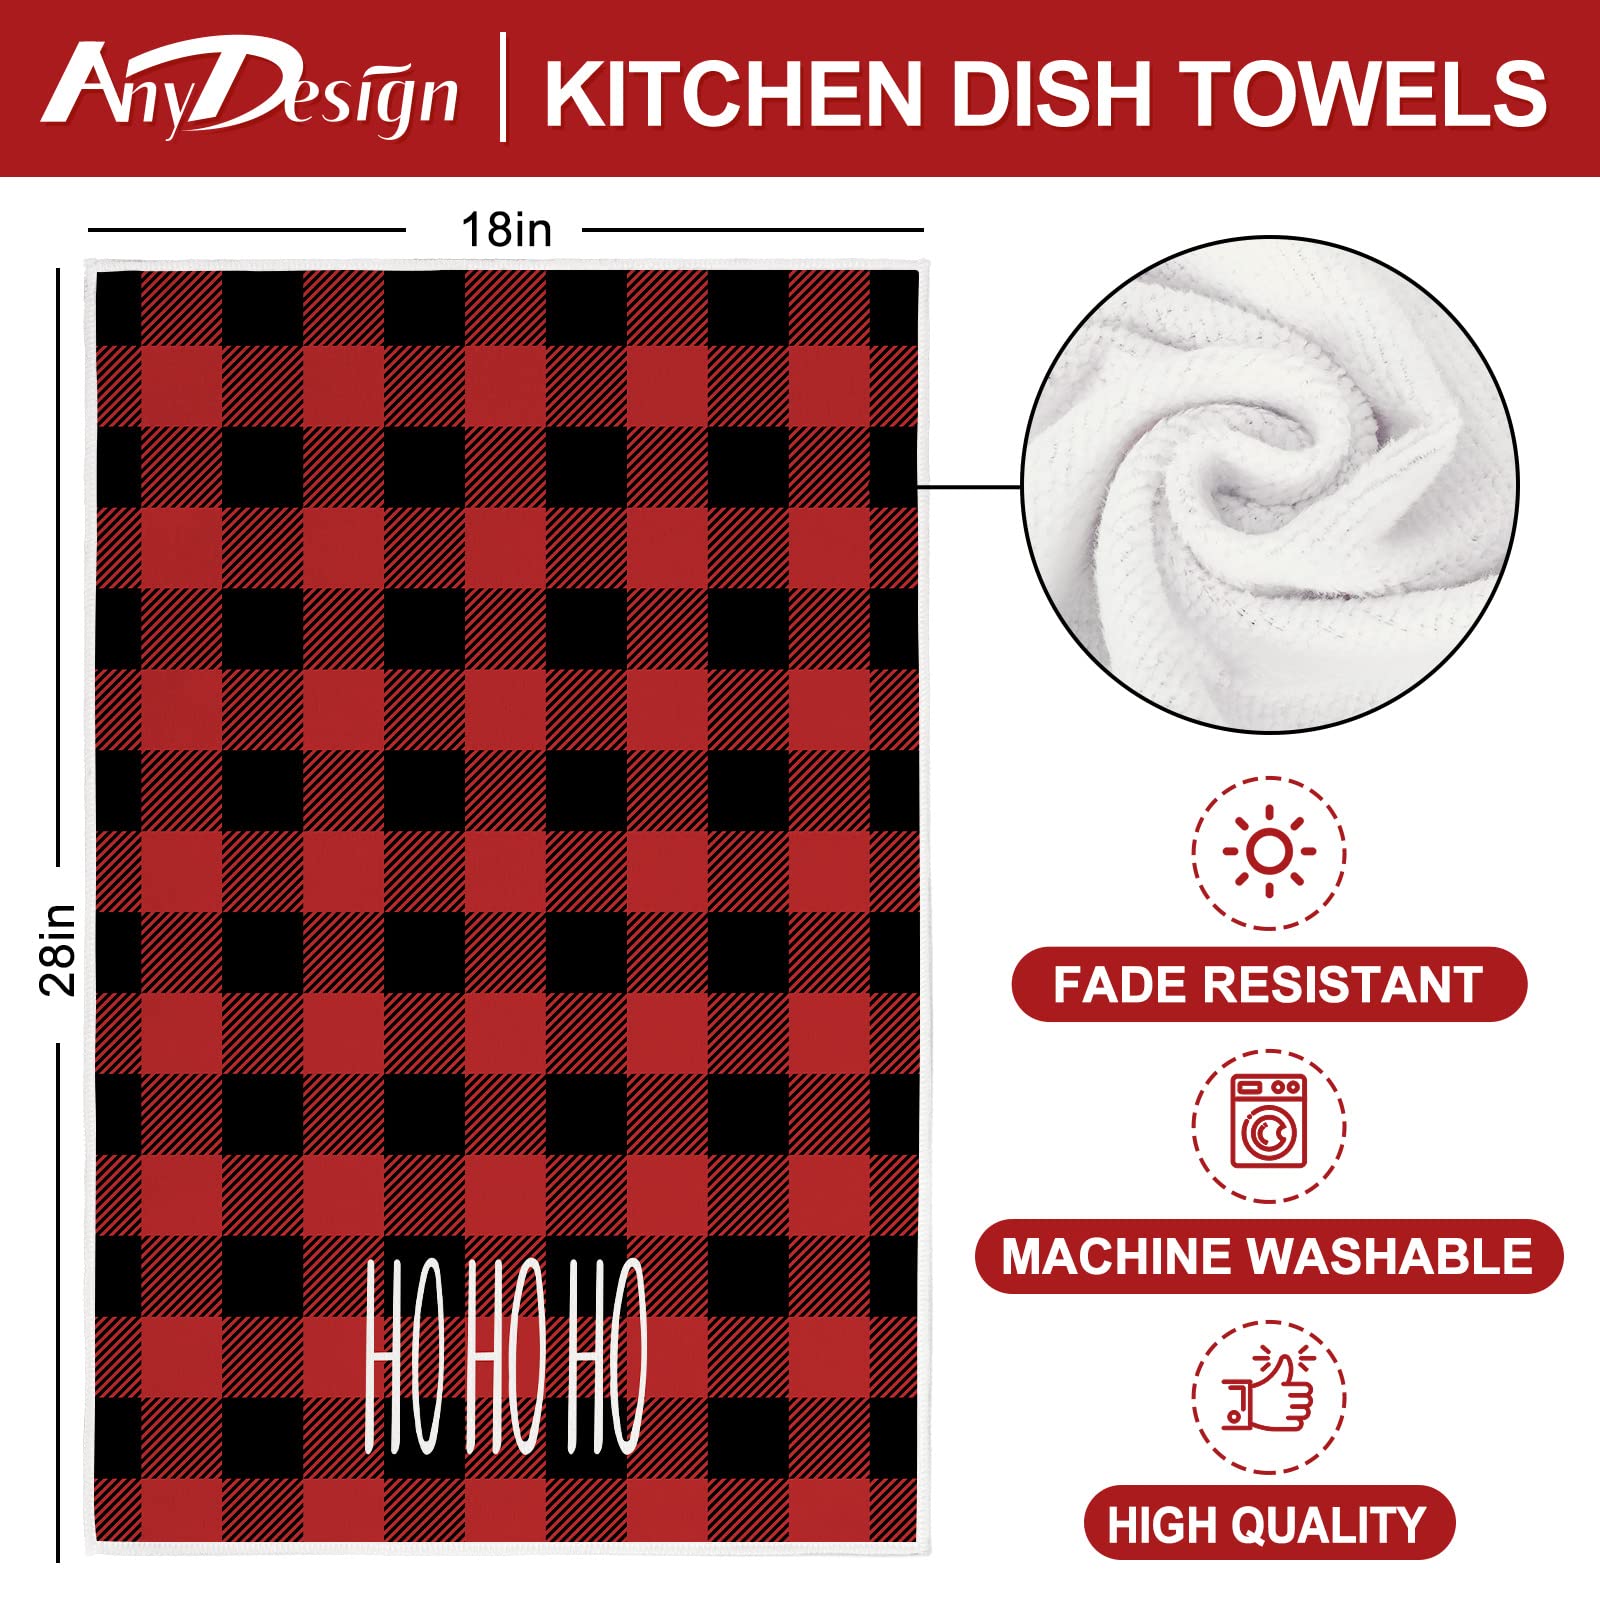 AnyDesign Christmas Kitchen Towel Red Black Buffalo Plaids Dish Towel 28 x 18 Merry Joy Tea Towel Decorative Hand Drying Towel for Kitchen Farmhouse Cooking Baking Party Supplies, 4 Pack